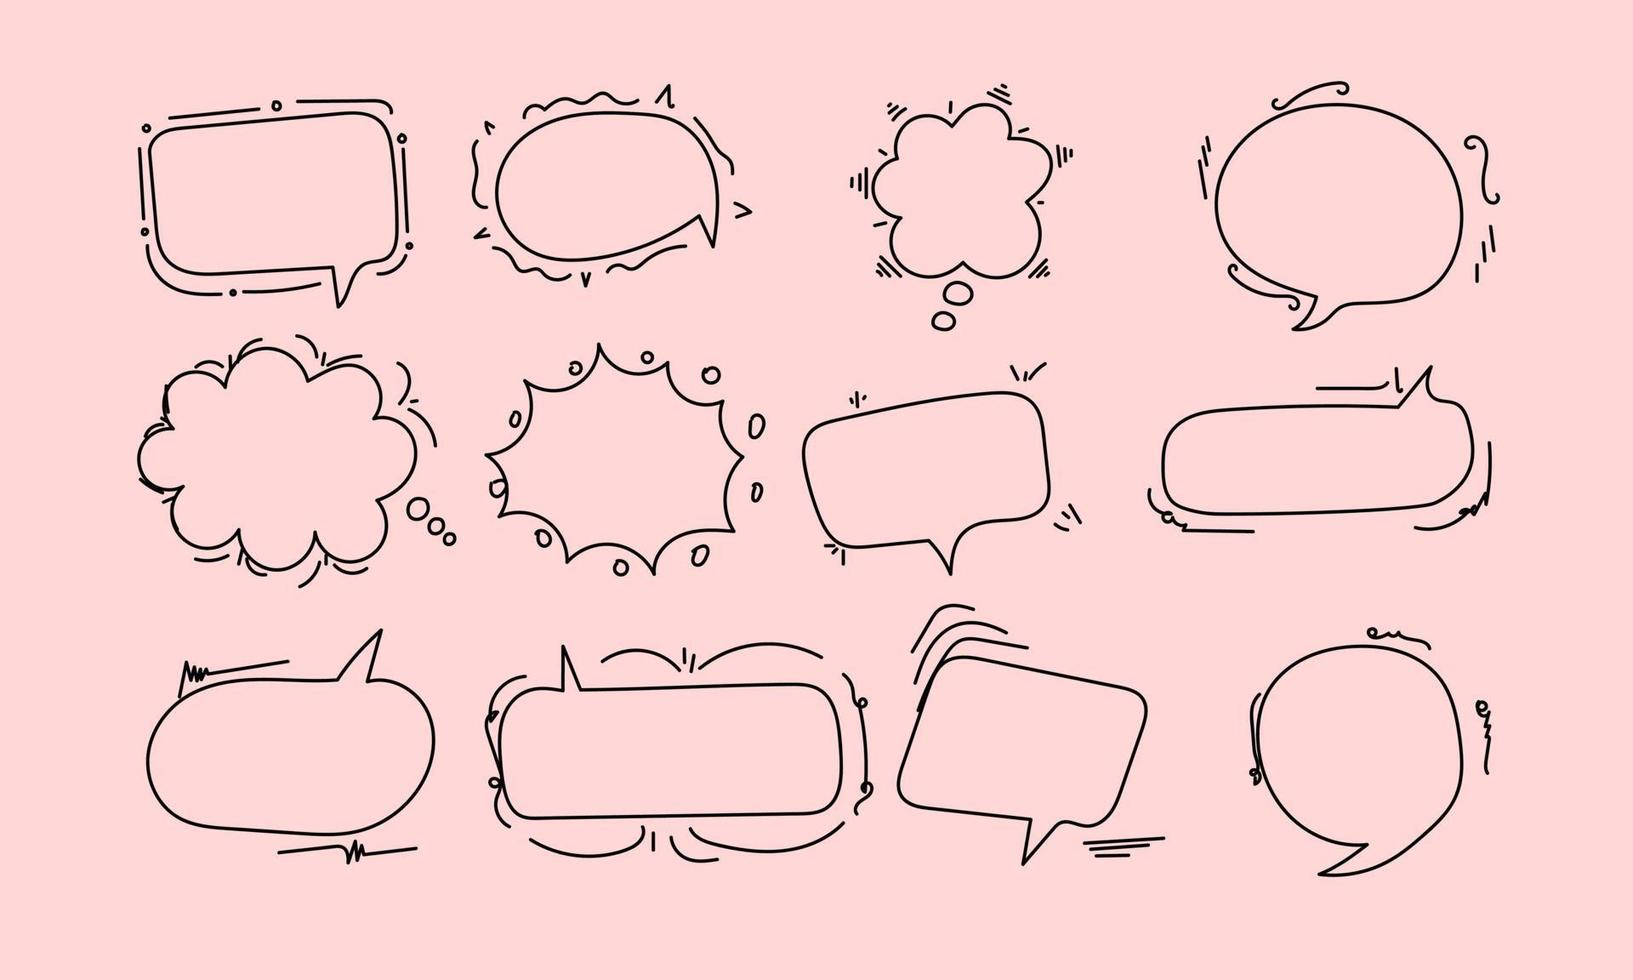 buble icon chat with abstract line art vector